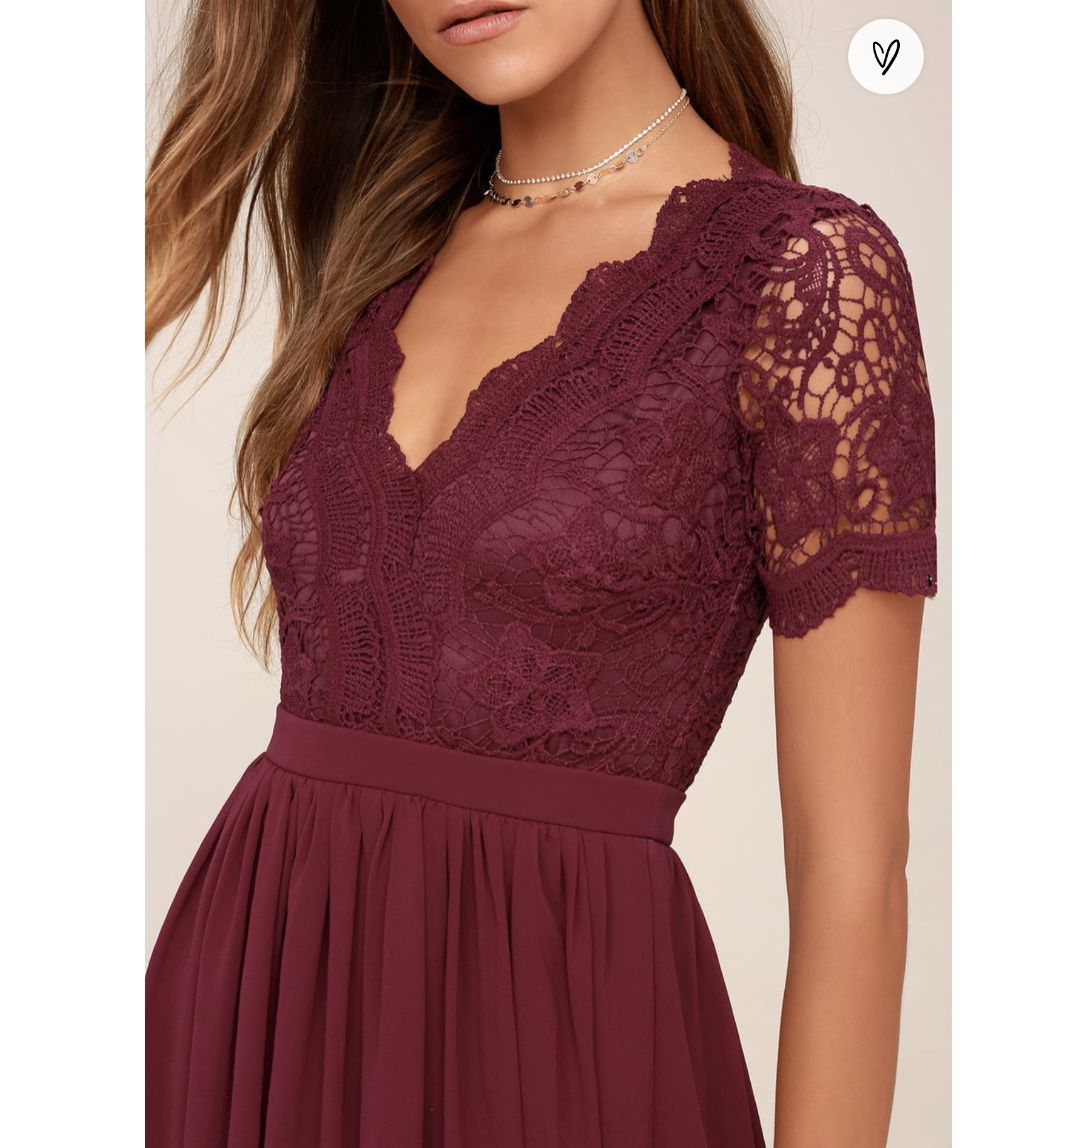 Lulus Angel in Disguise Burgundy Lace Skater Dress Size M